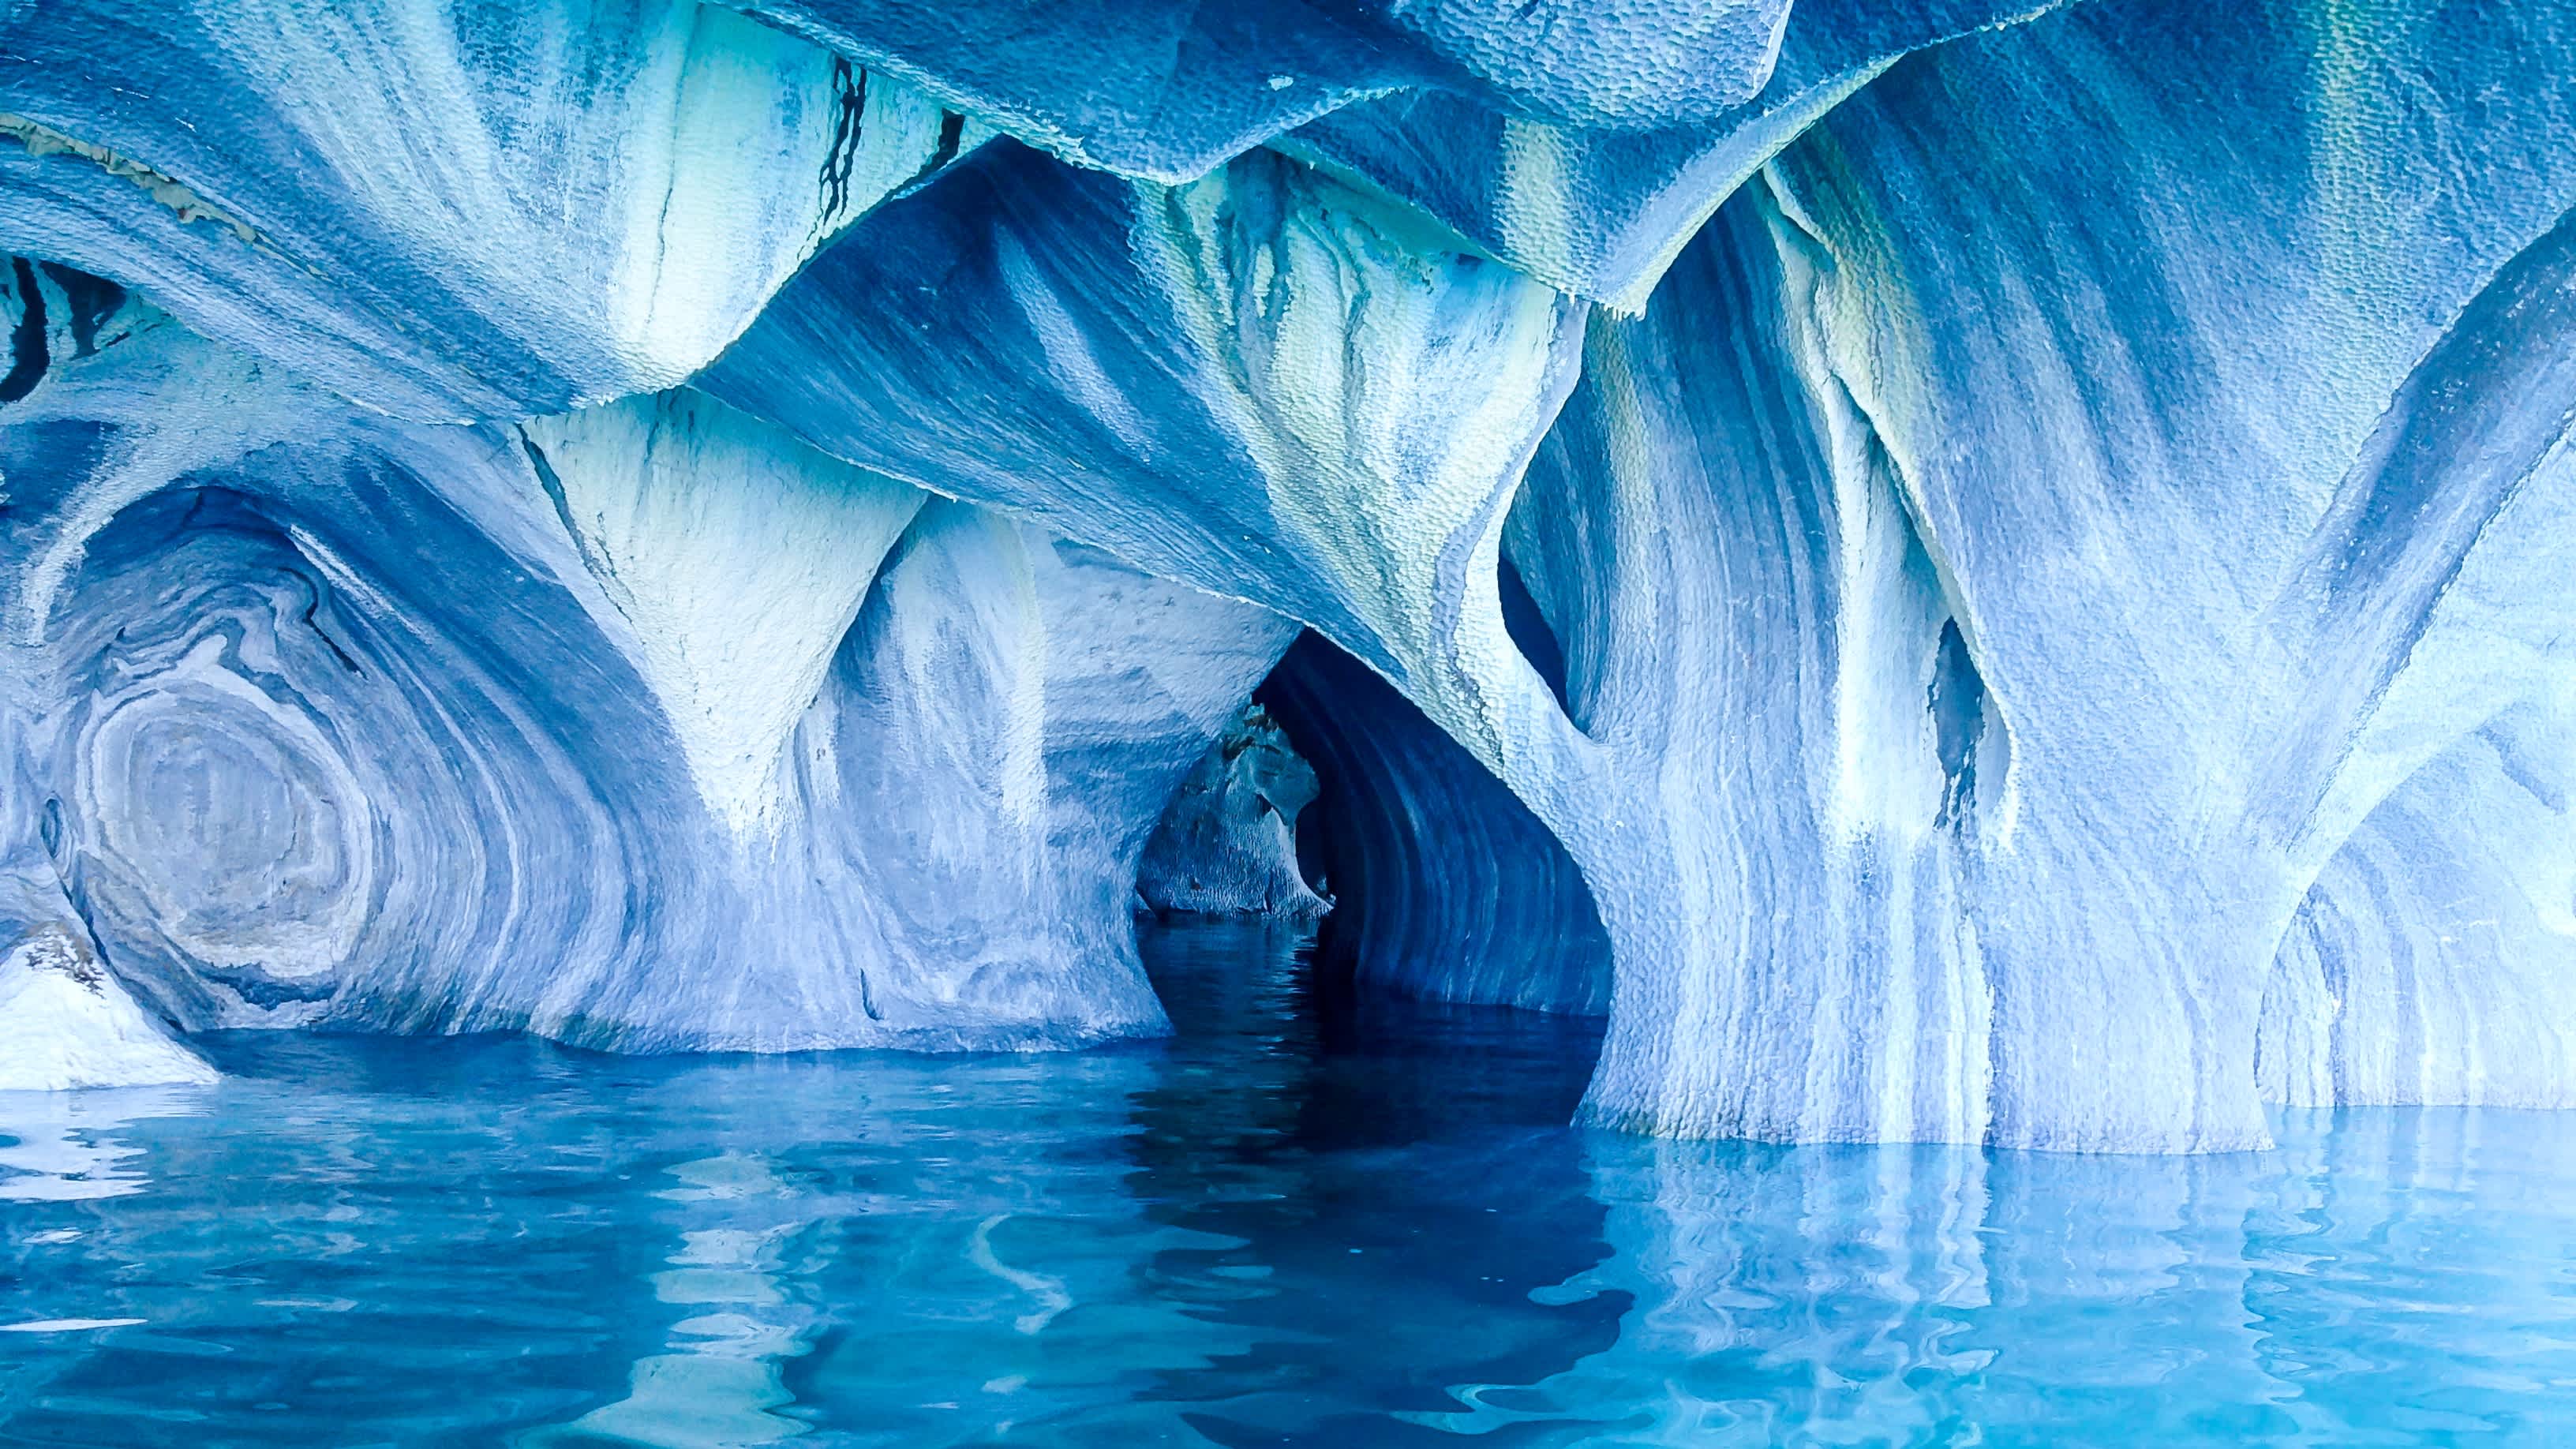 Discover this beautiful blue cave beneath Chile on a tour of Chile